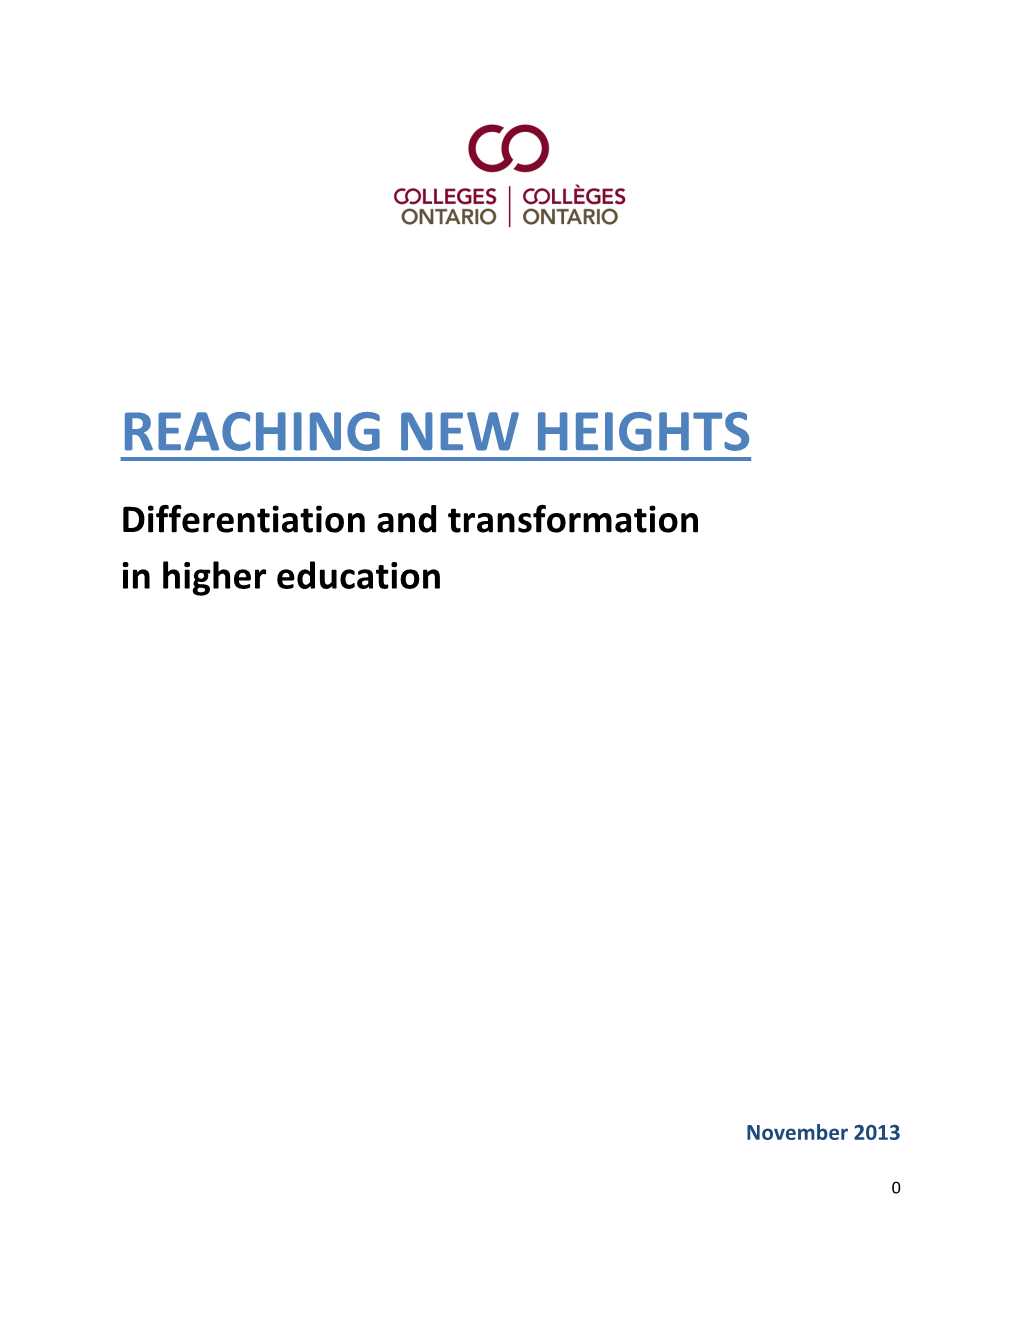 REACHING NEW HEIGHTS Differentiation and Transformation in Higher Education